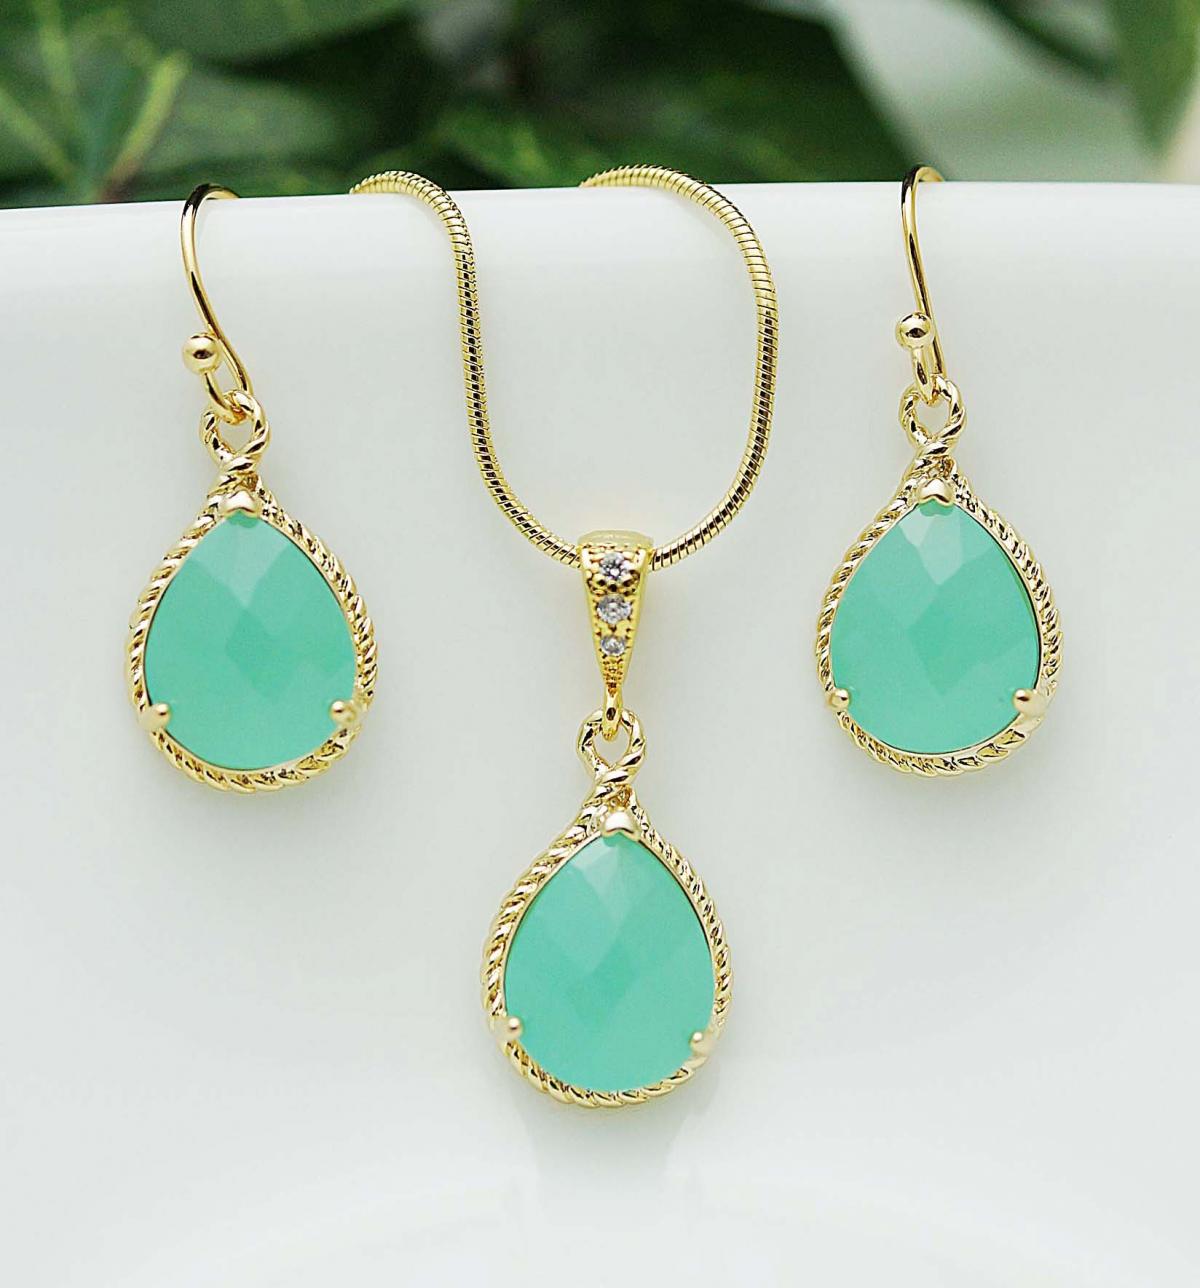 Wedding Jewelry Bridesmaid Jewelry Bridesmaid Earrings Bridesmaid Necklace Mint Opal Glass Gold Trimmed Pear Cut Bridesmaid Gift